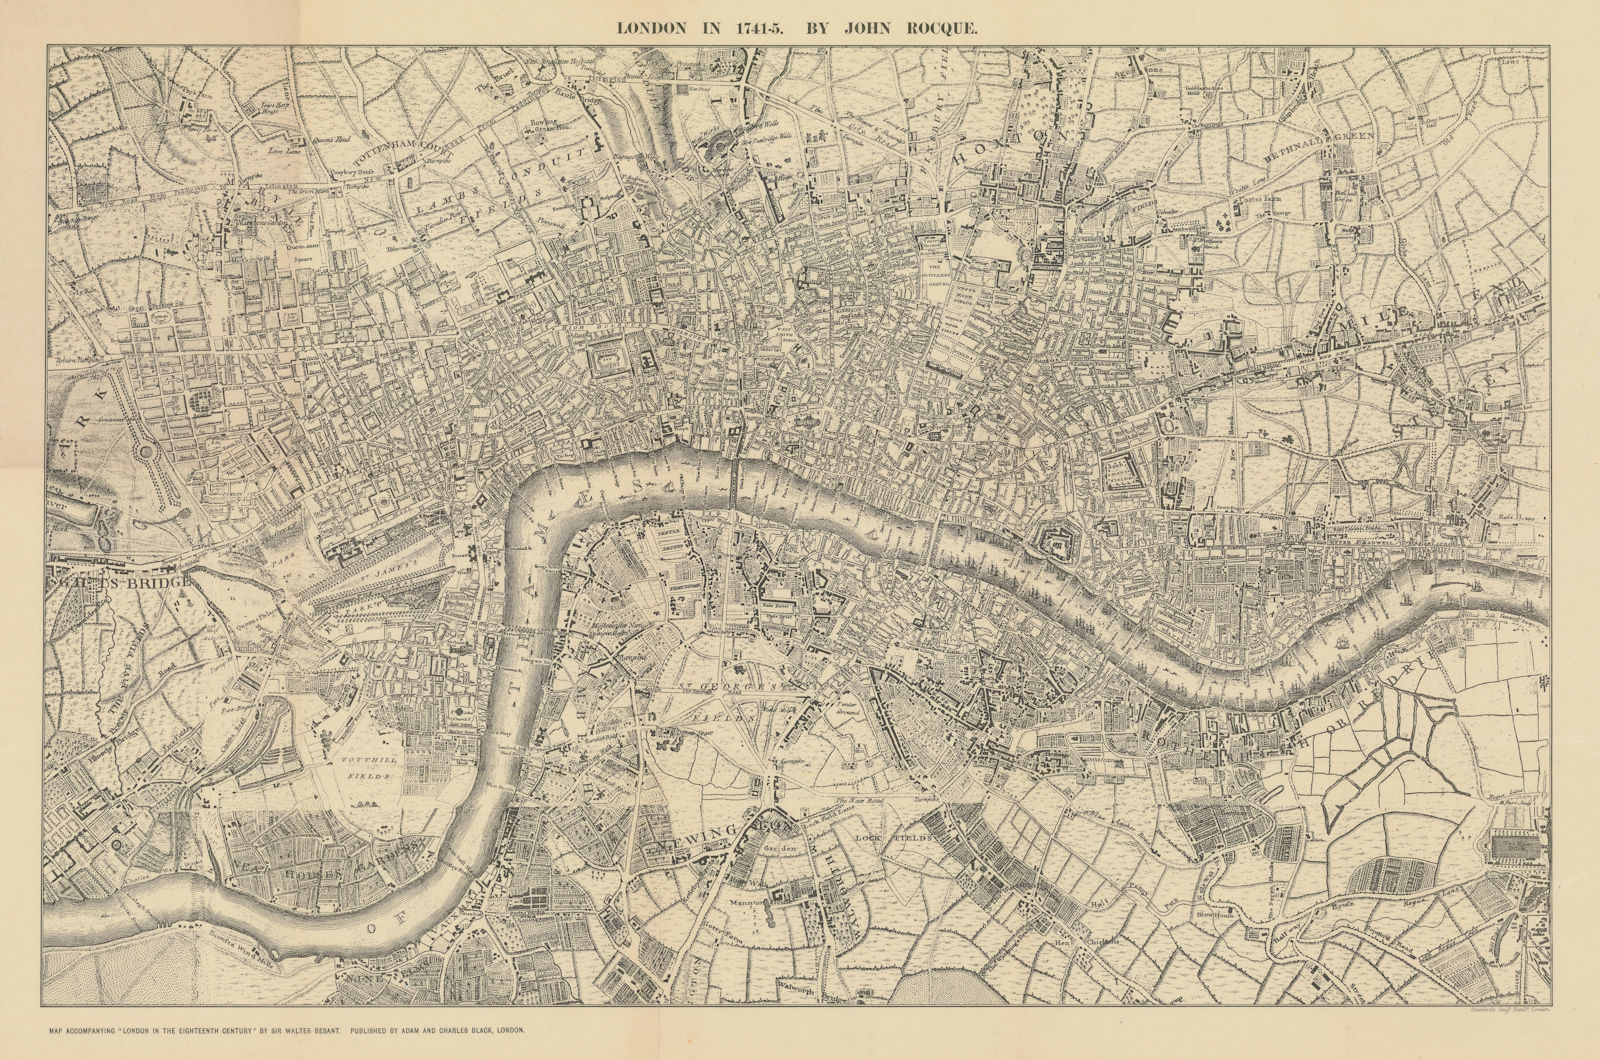 Associate Product London in 1741-5 after John Rocque. Southwark Westminster. 52x79cm 1908 map